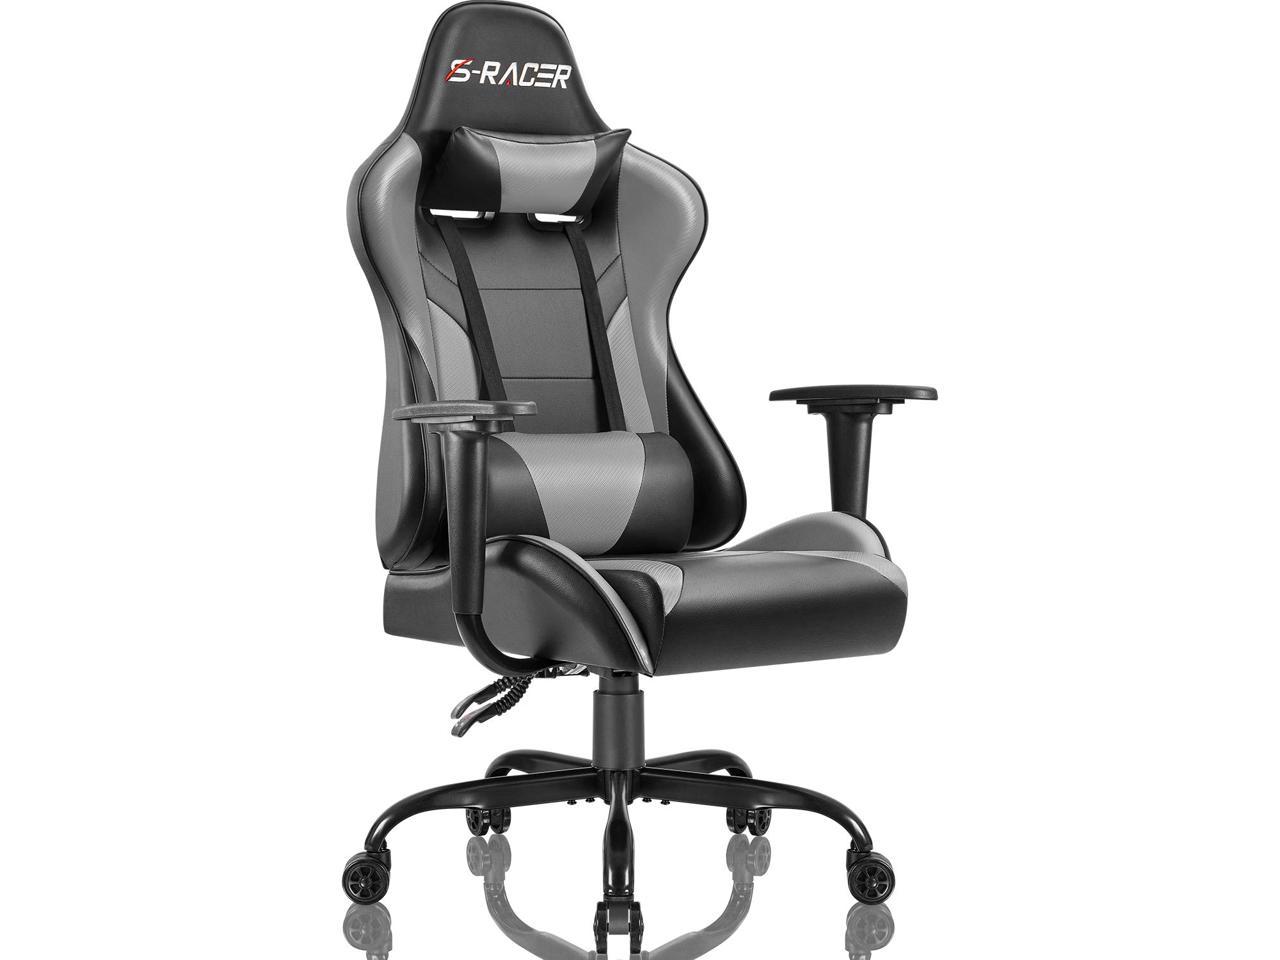 Corner Most Ergonomic Gaming Chairs for Small Room